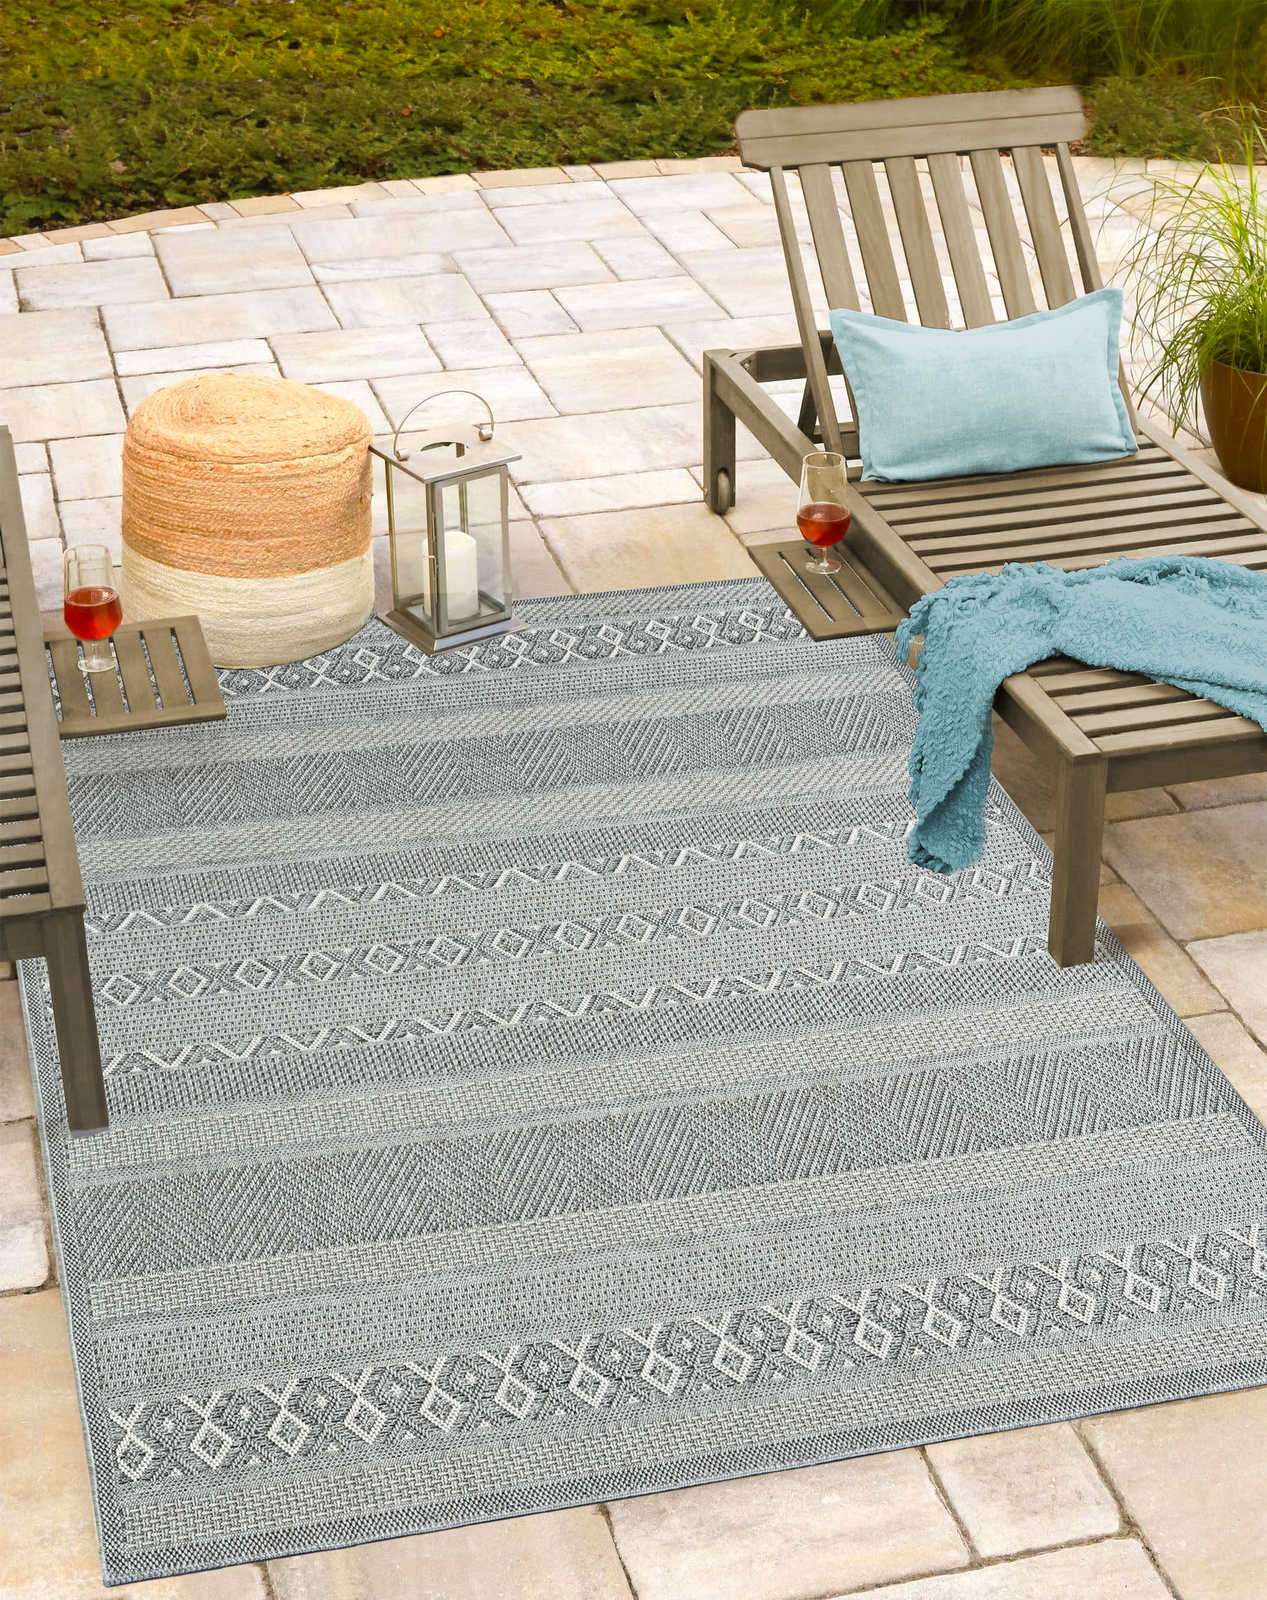 Plain Patterned Outdoor Rug in Grey as Runner - 180 x 67 cm
